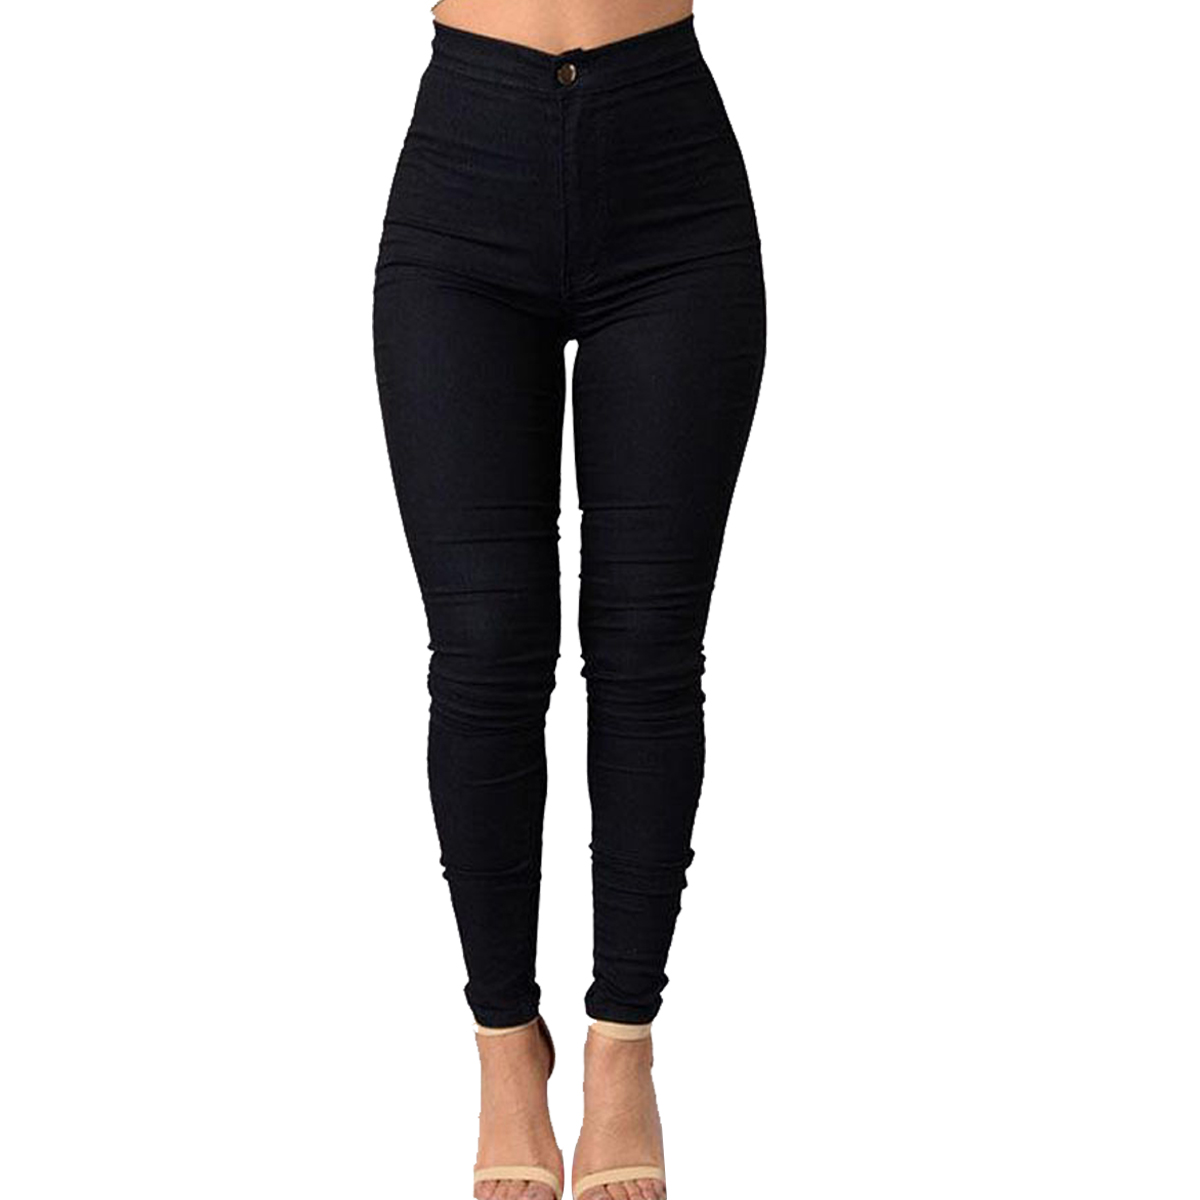 Woman Pencil Stretch Casual Look Denim Skinny Jeans Pants High Waist Trousers - image 3 of 5